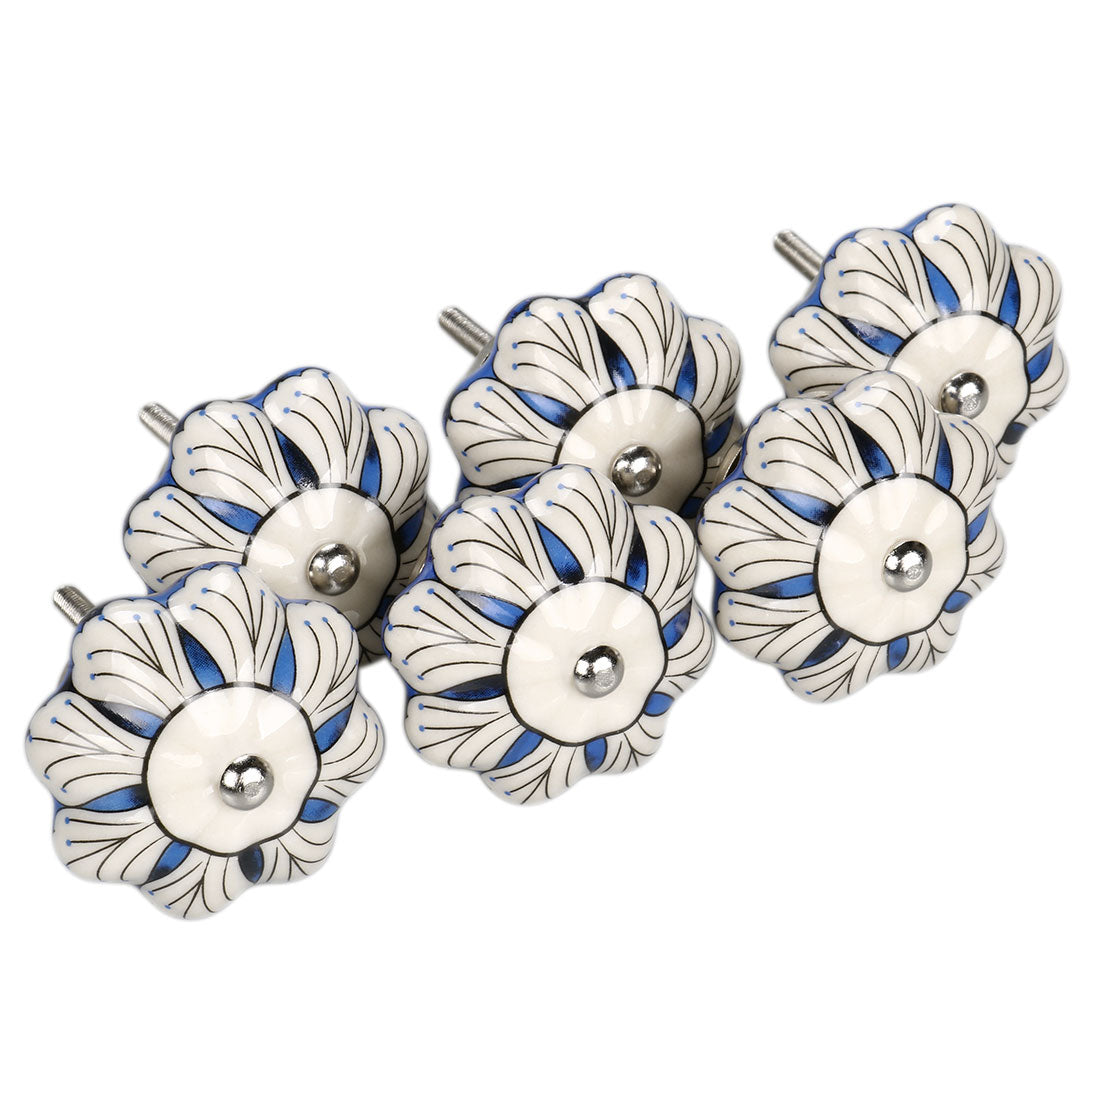 uxcell Uxcell 6 x Hand Painted Ceramic Door Knobs Cabinet Drawer Wardrobe Cupboard Pull Handles #7